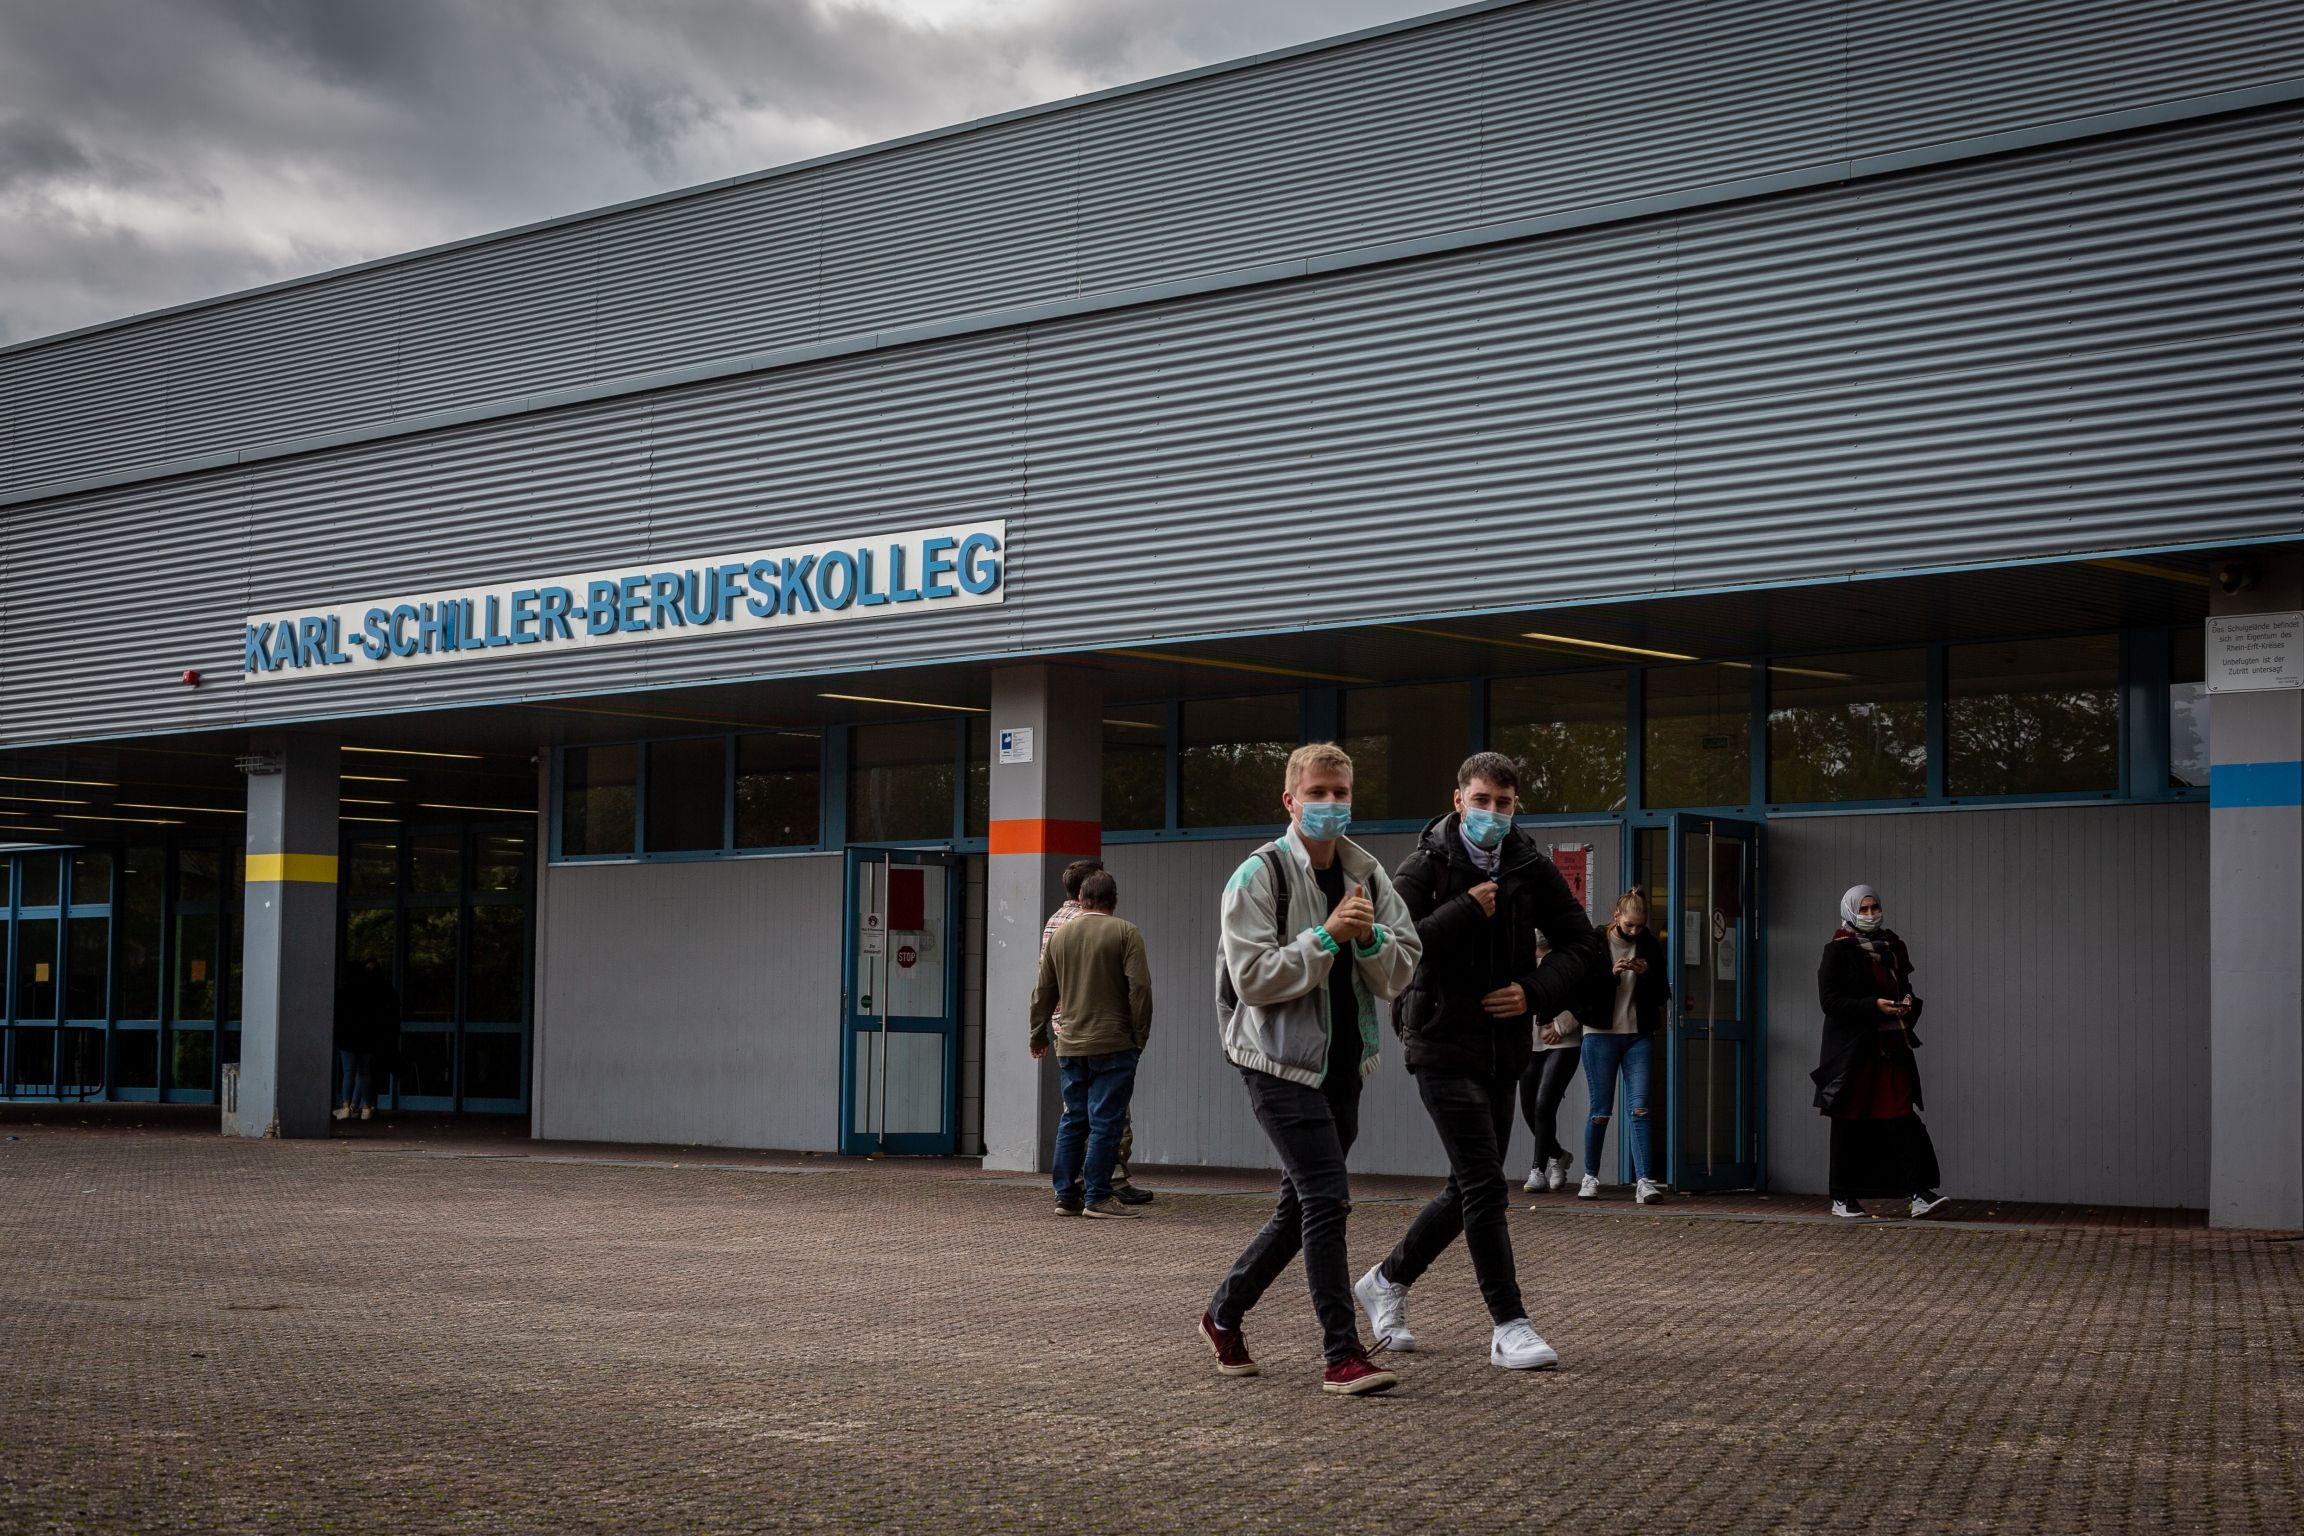 Students leave Karl-Schiller-Berufskolleg in Brühl, a secondary school outside of Cologne, Germany. Students are required by the school to wear masks on schools grounds. Image by Ryan Delaney. Germany, 2020.

